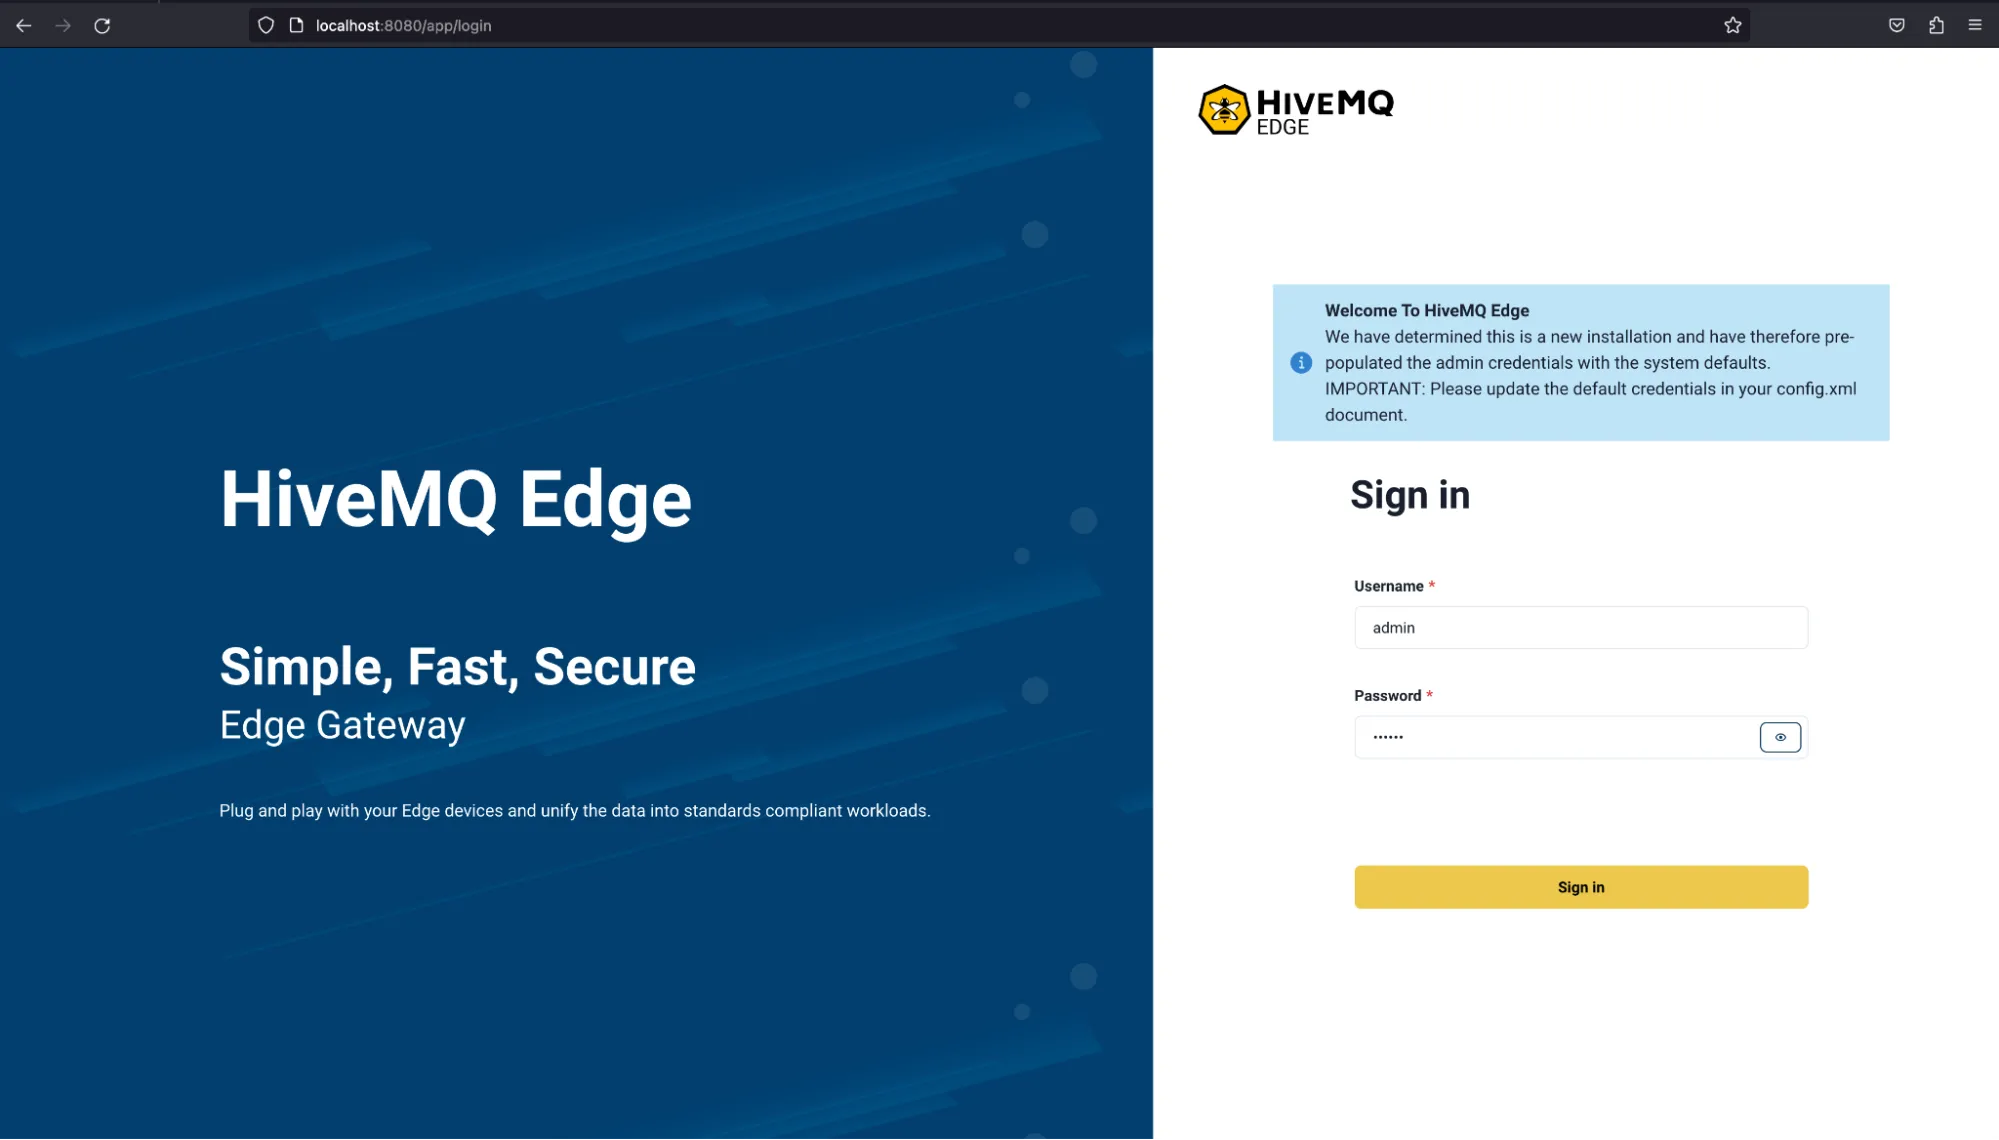 Accessing the HiveMQ Edge Interface